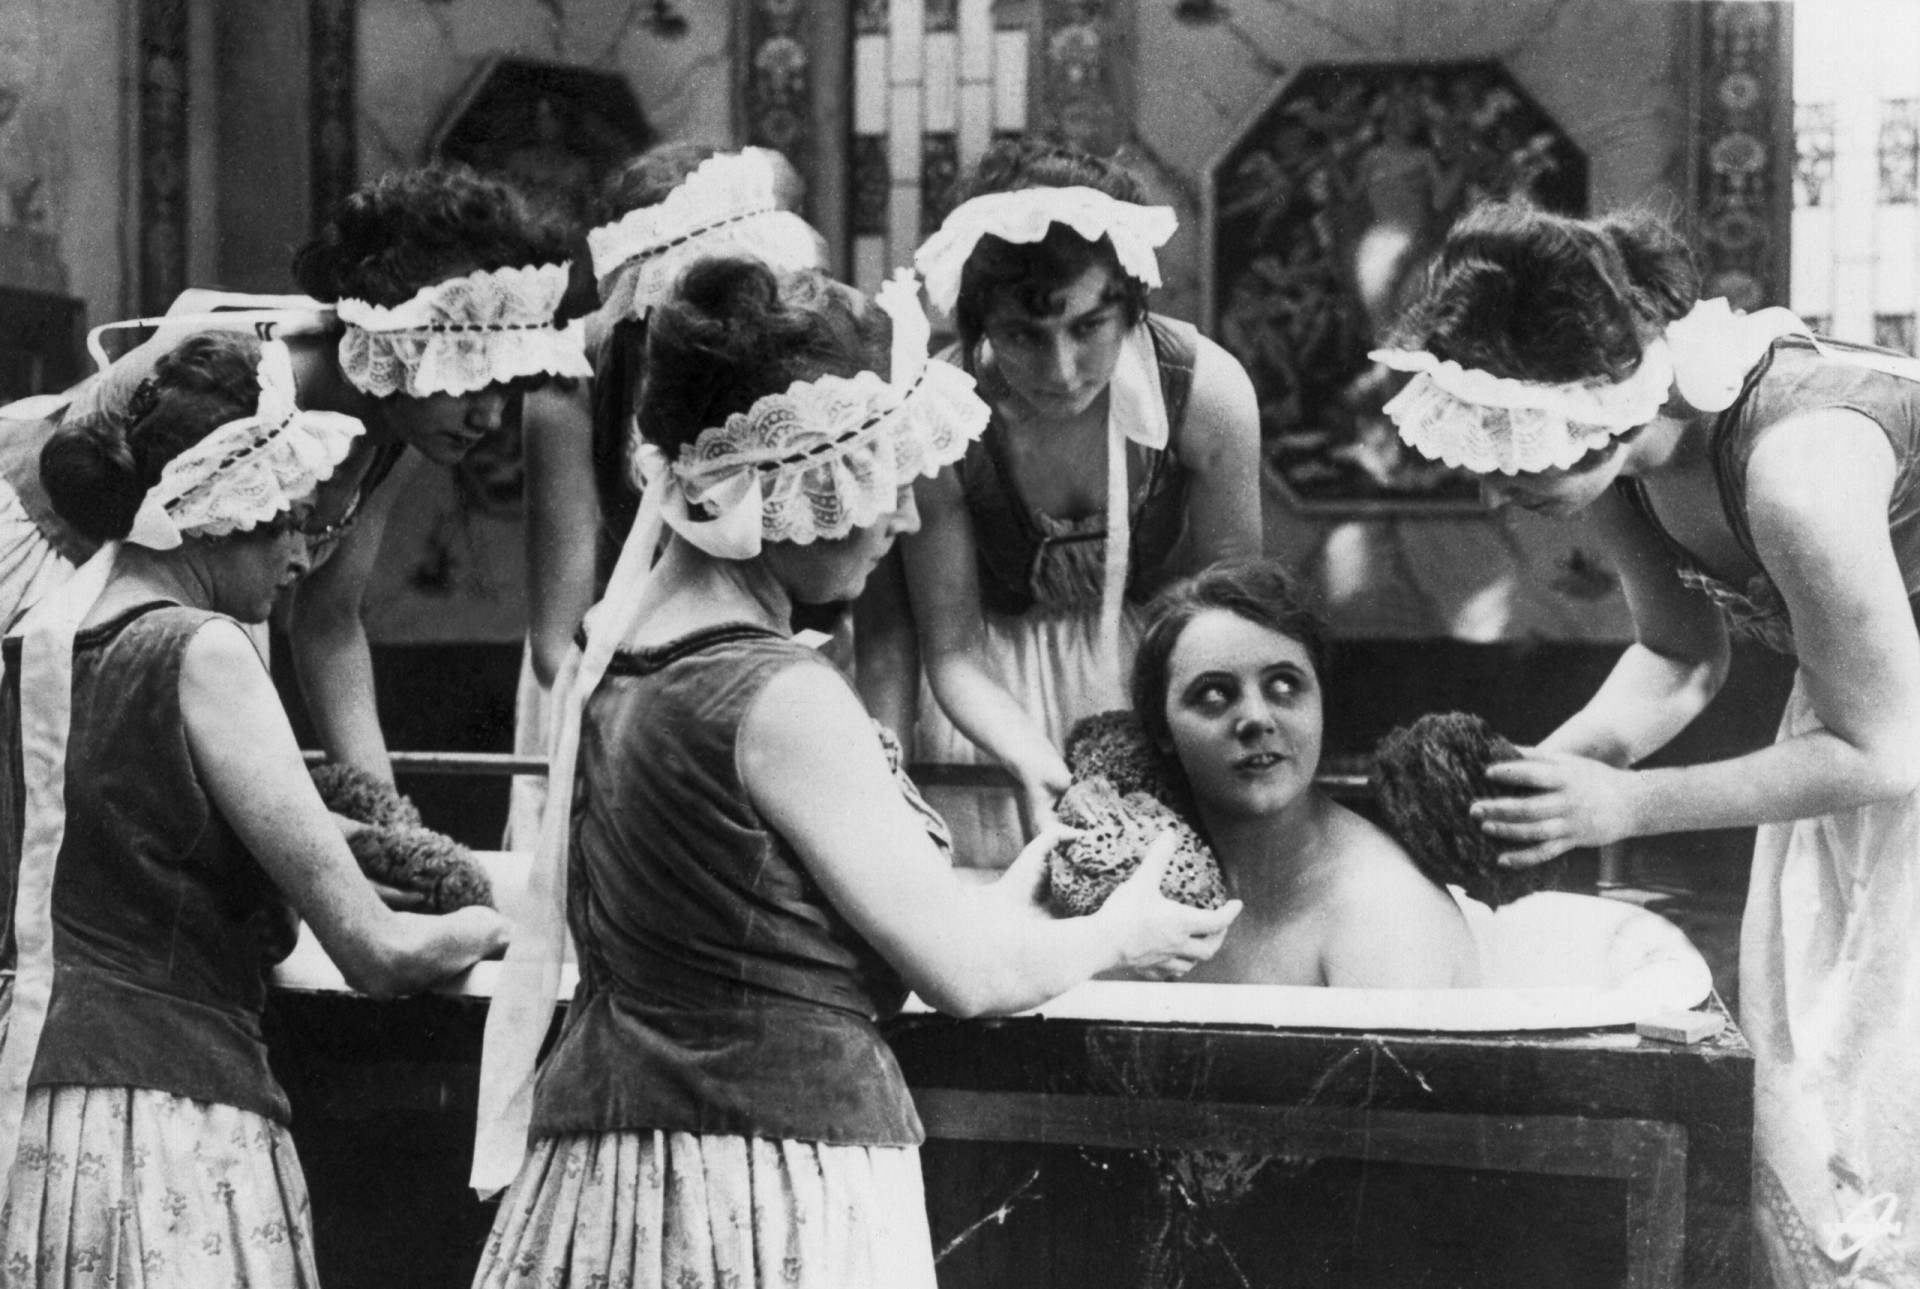 <p>Translated into English as 'The Oyster Princess,' this early German silent comedy features Ossi Oswalda, seen here in a bathtub surrounded by handmaidens. The actress was dubbed the "German Mary Pickford" due to her popularity at the time.</p><p>Sources: (Variety) (The Washington Post) (Britannica)</p><p>See also: <a href="https://www.starsinsider.com/celebrity/462856/soakin-stars-celebs-who-love-baths">Soakin' stars—Celebs who love baths</a>.</p><p>You may also like:<a href="https://www.starsinsider.com/n/402209?utm_source=msn.com&utm_medium=display&utm_campaign=referral_description&utm_content=546036en-en"> Do you live in one of the world's 50 coolest neighborhoods?</a></p>